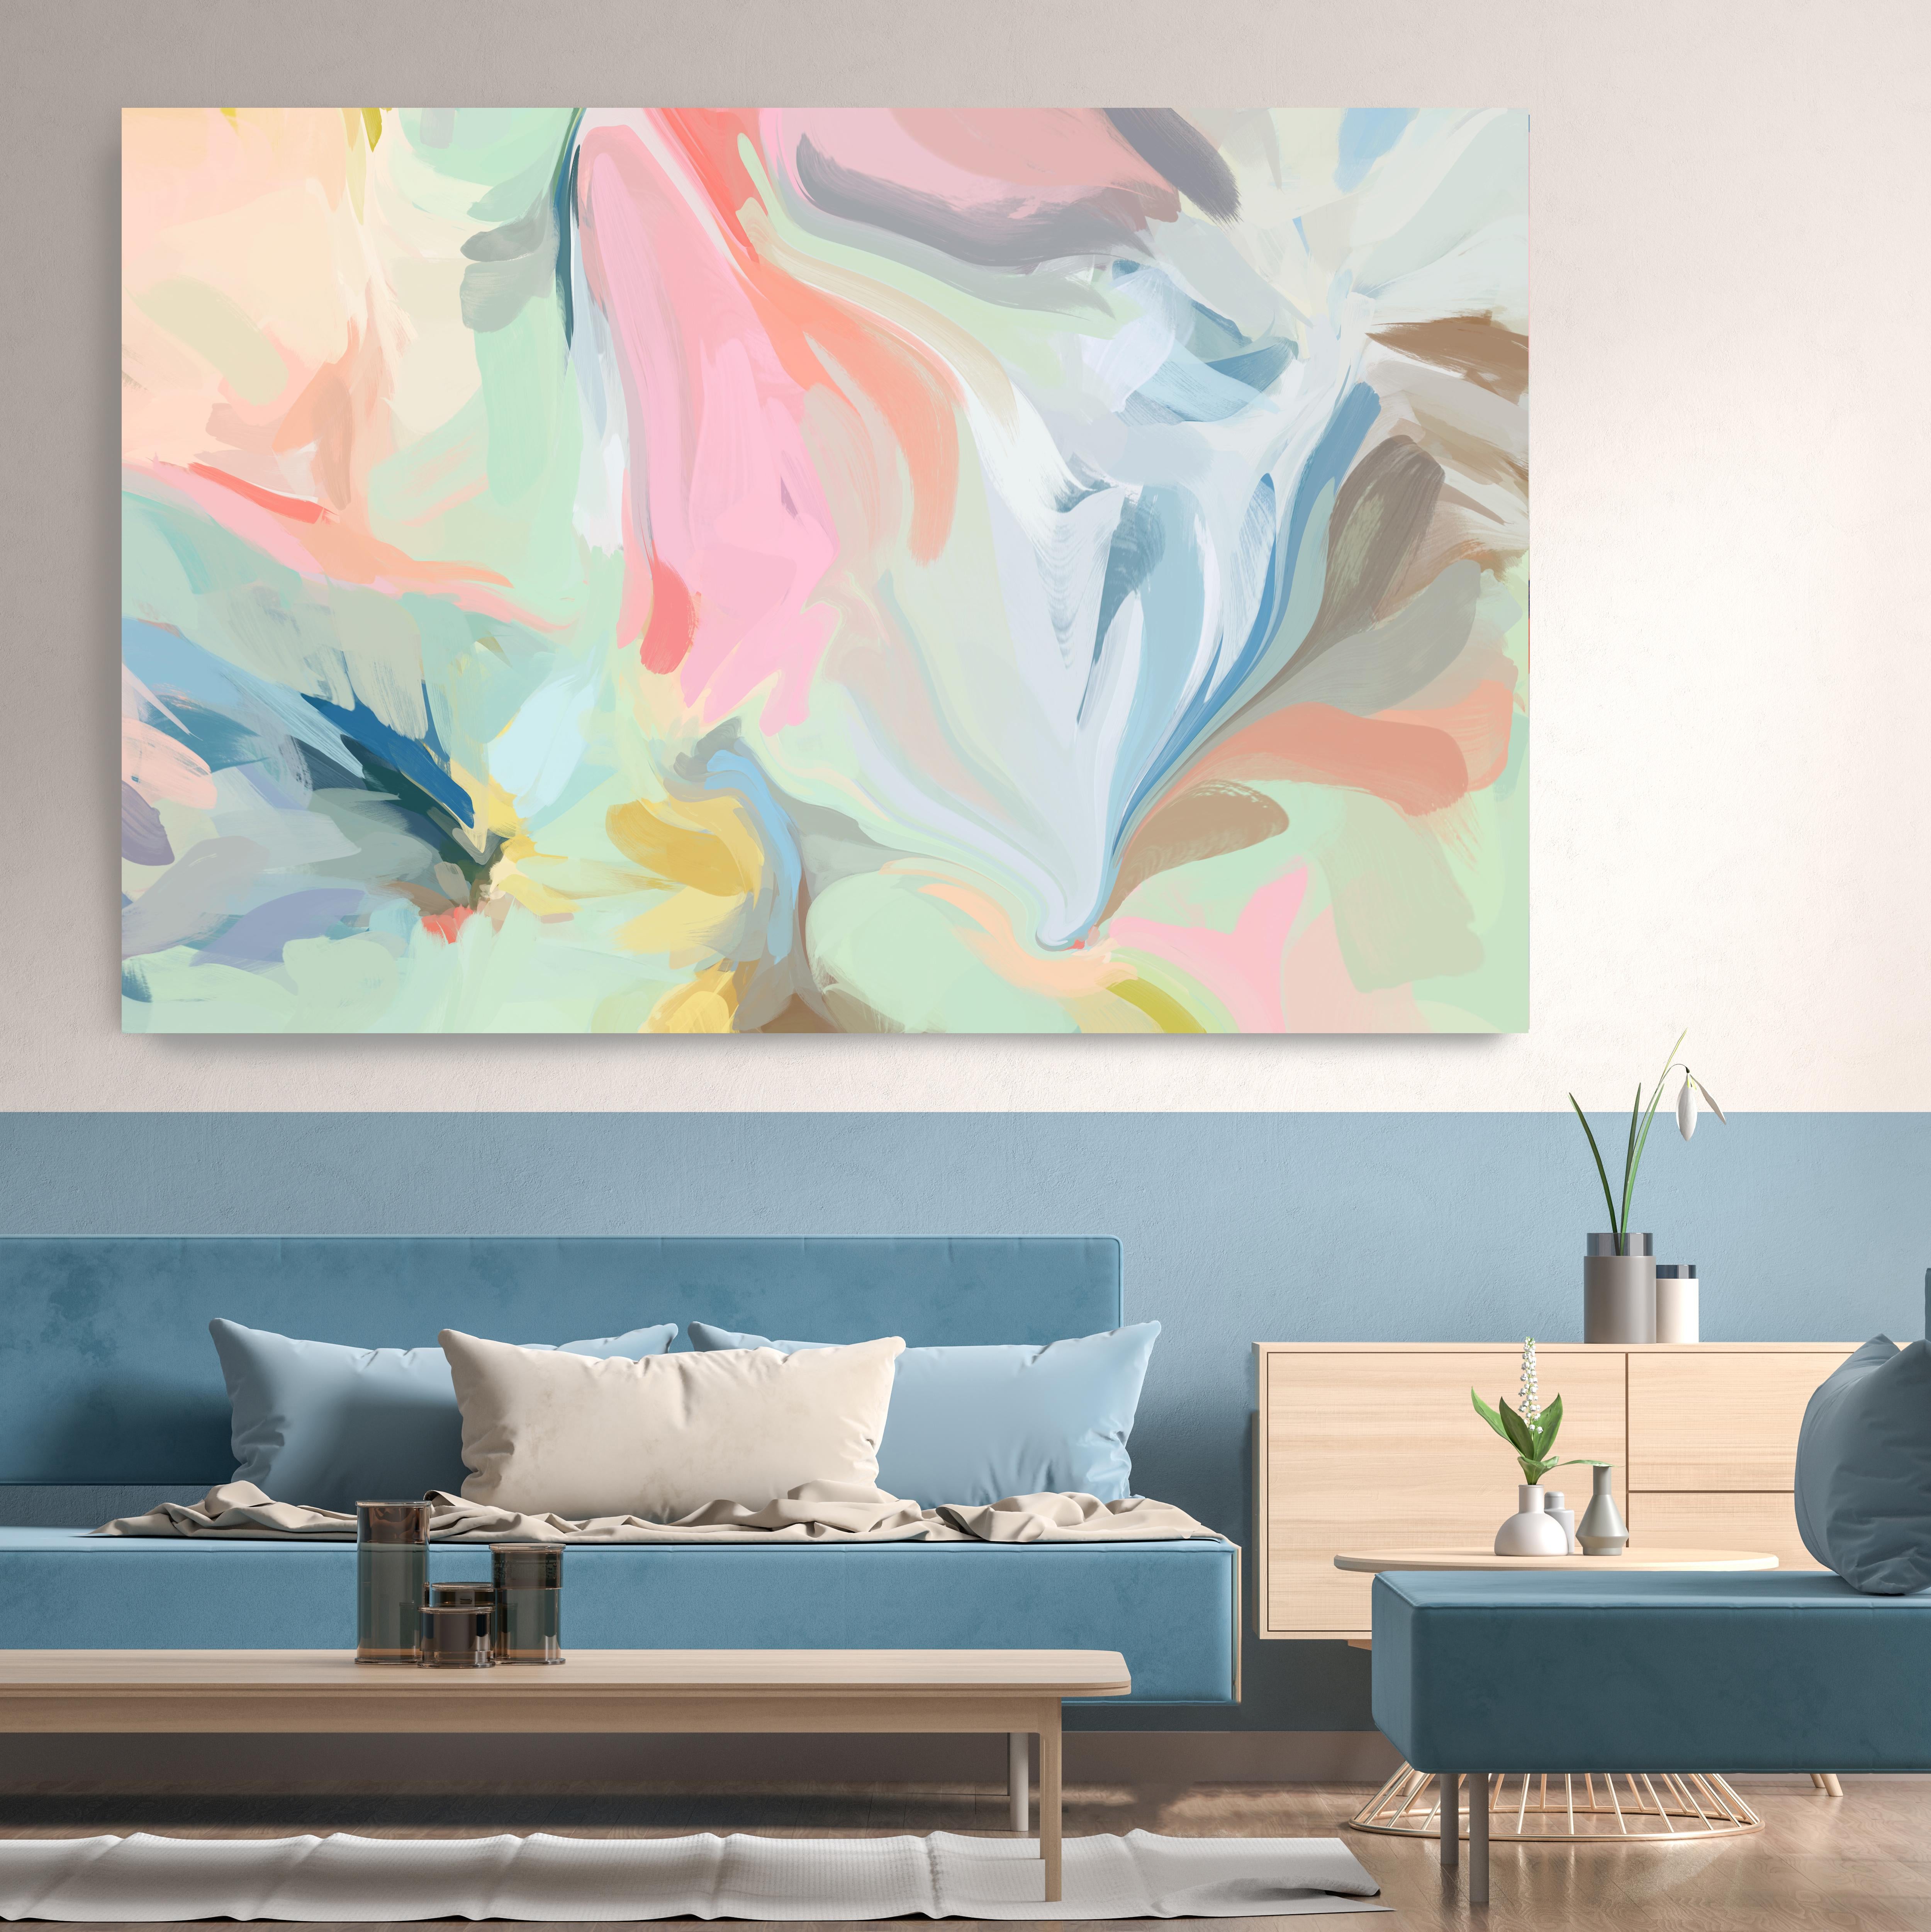 One of a kind Mixed Medium on Canvas

Artwork: Original abstract mixed media work on canvas, which combines new media - digital original hand painting, printed on canvas, then hand painted with acrylic, 3D painting, ink, acrylic gels, texturing